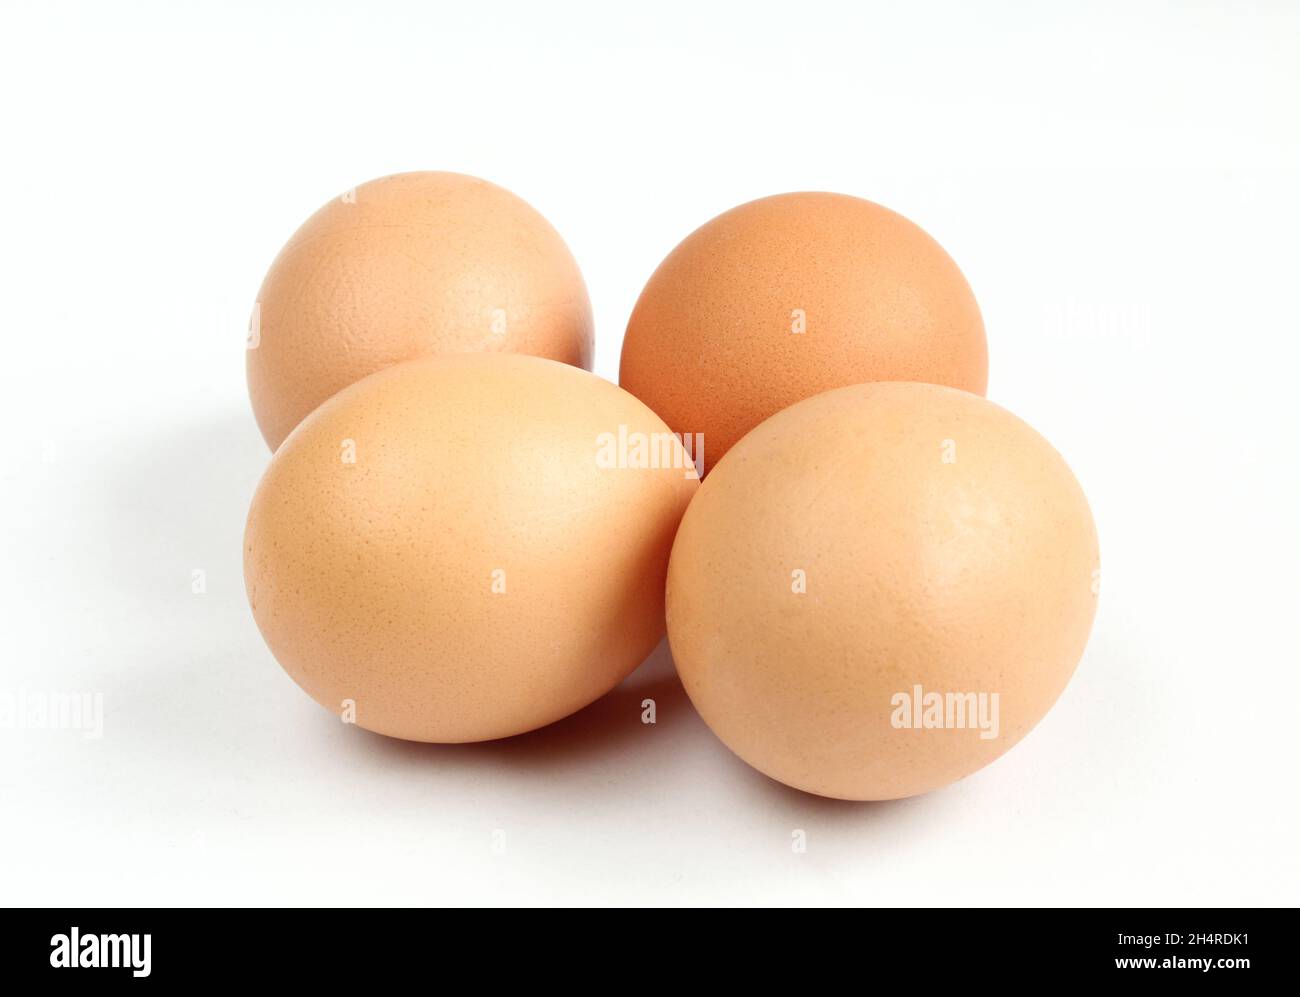 Group of uncooked eggs isolated on white background. Stock Photo